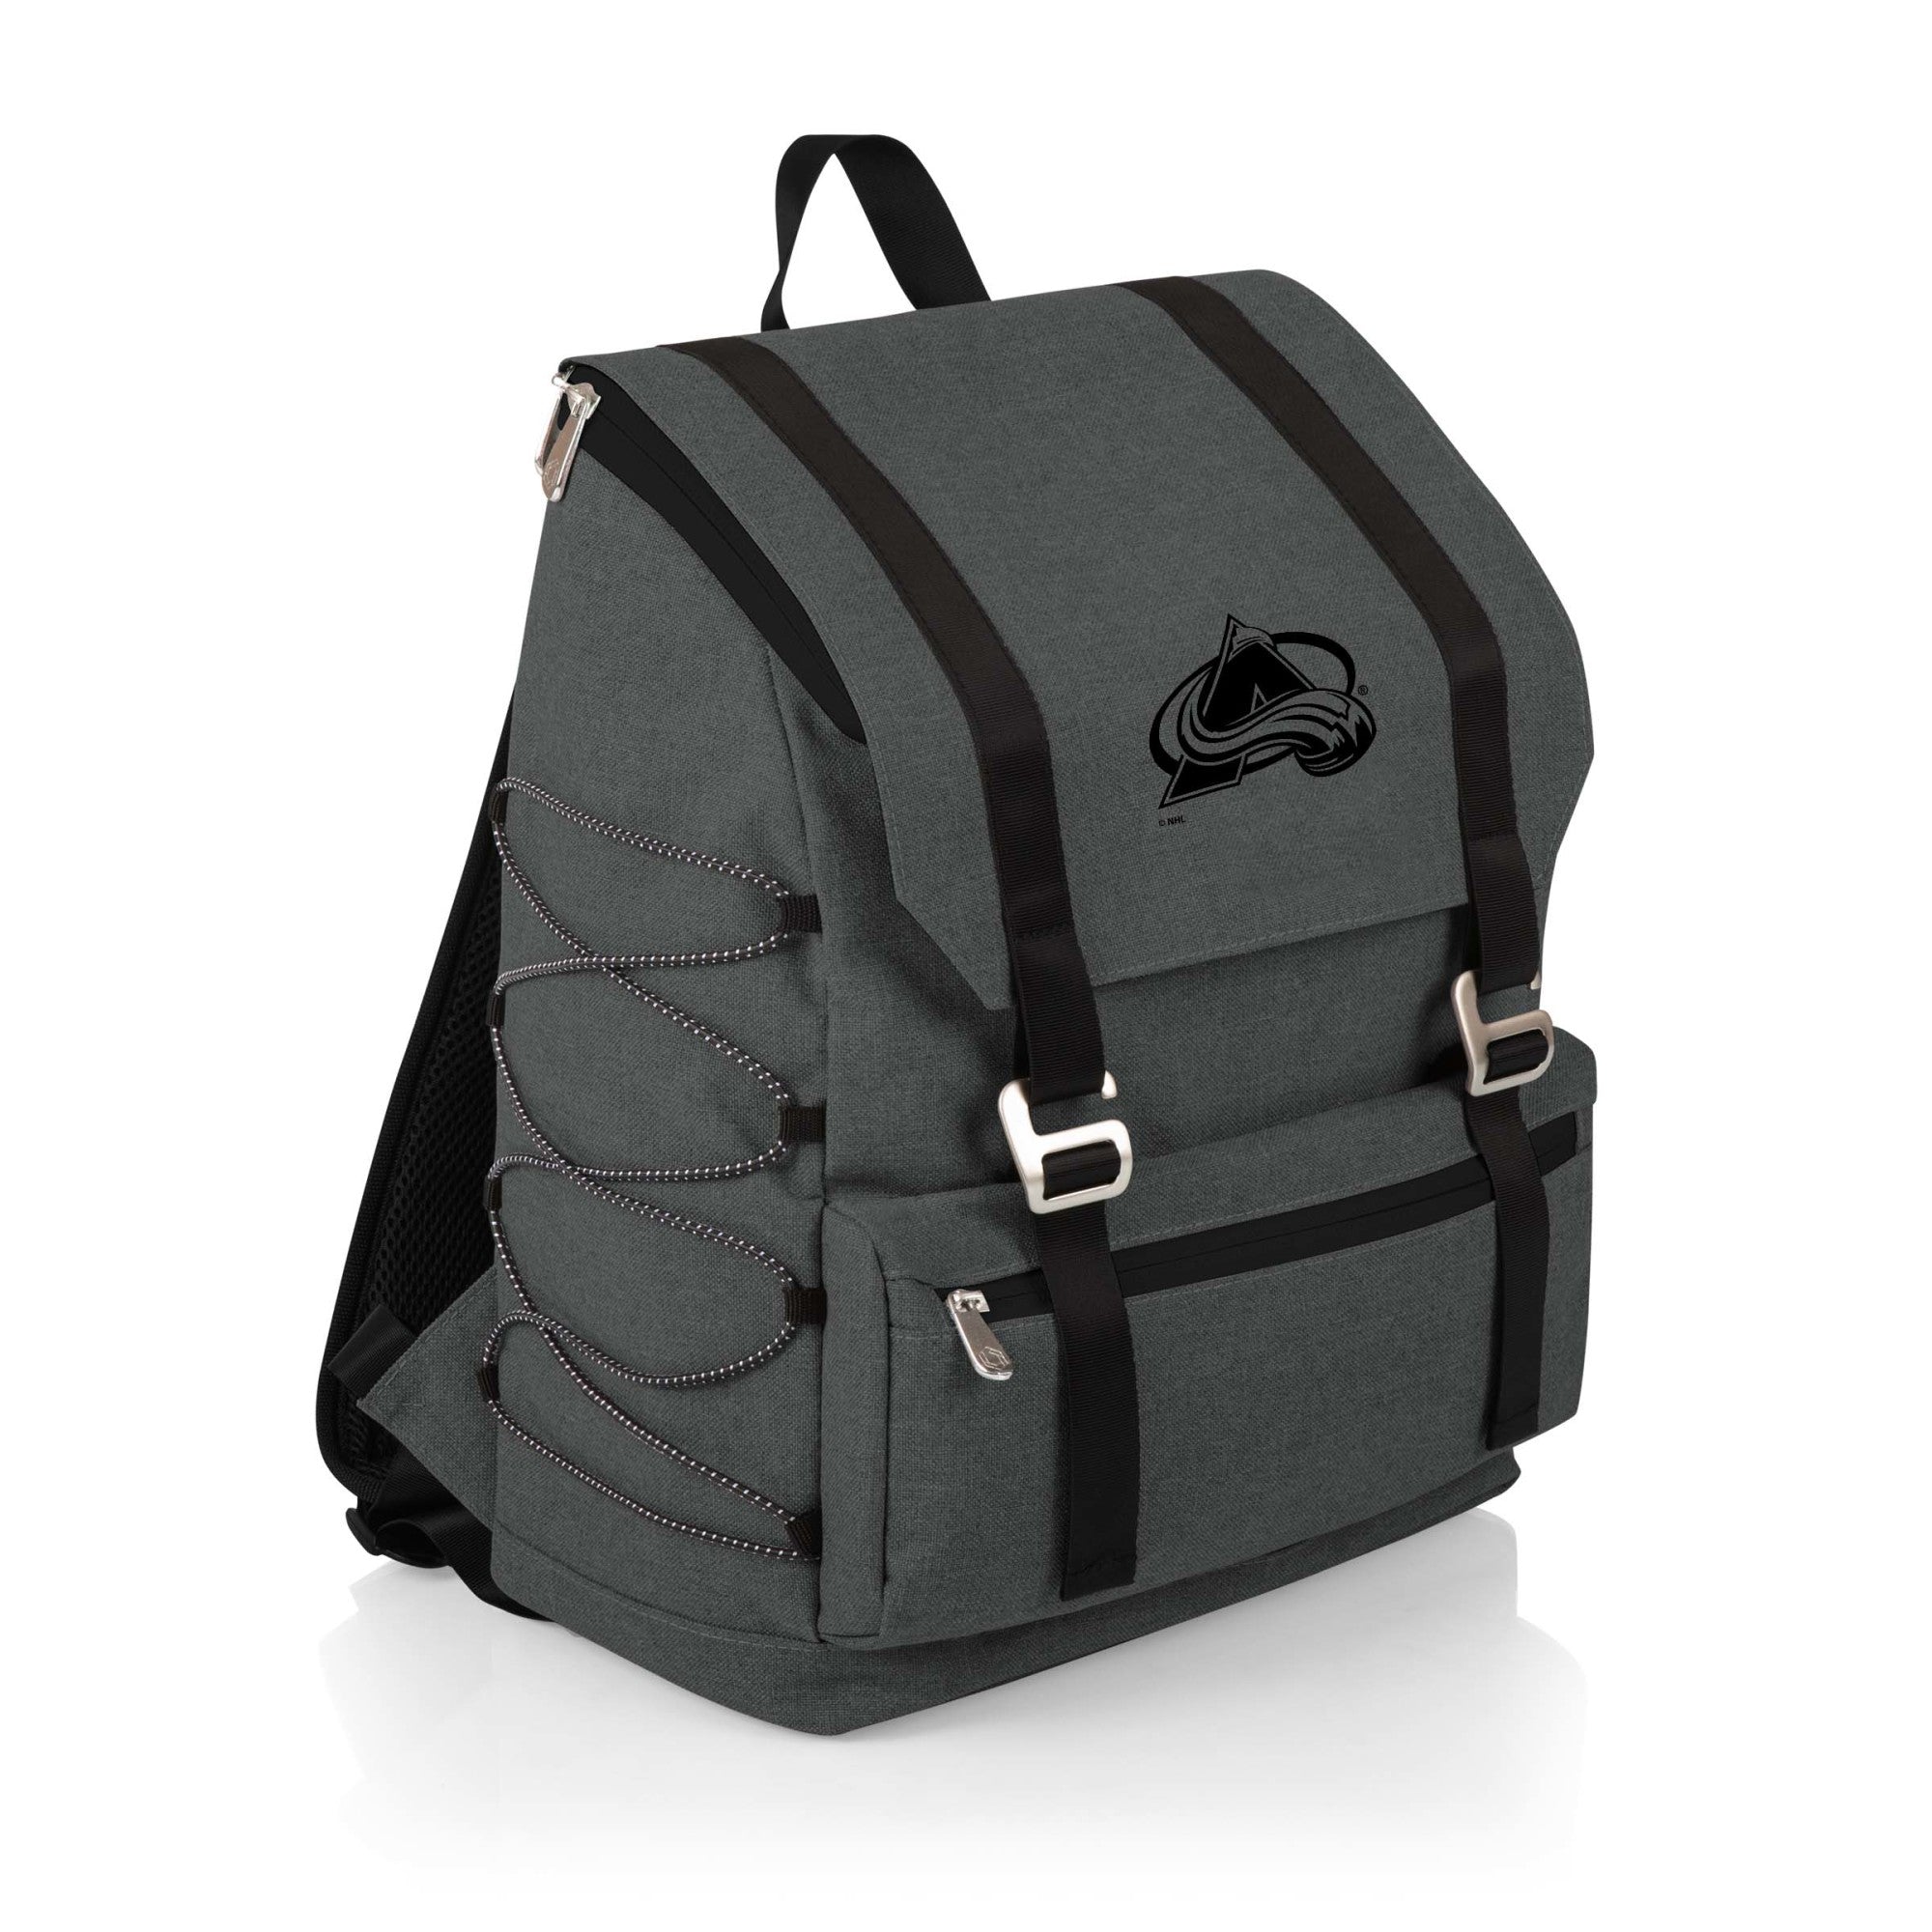 Colorado Avalanche - On The Go Traverse Backpack Cooler